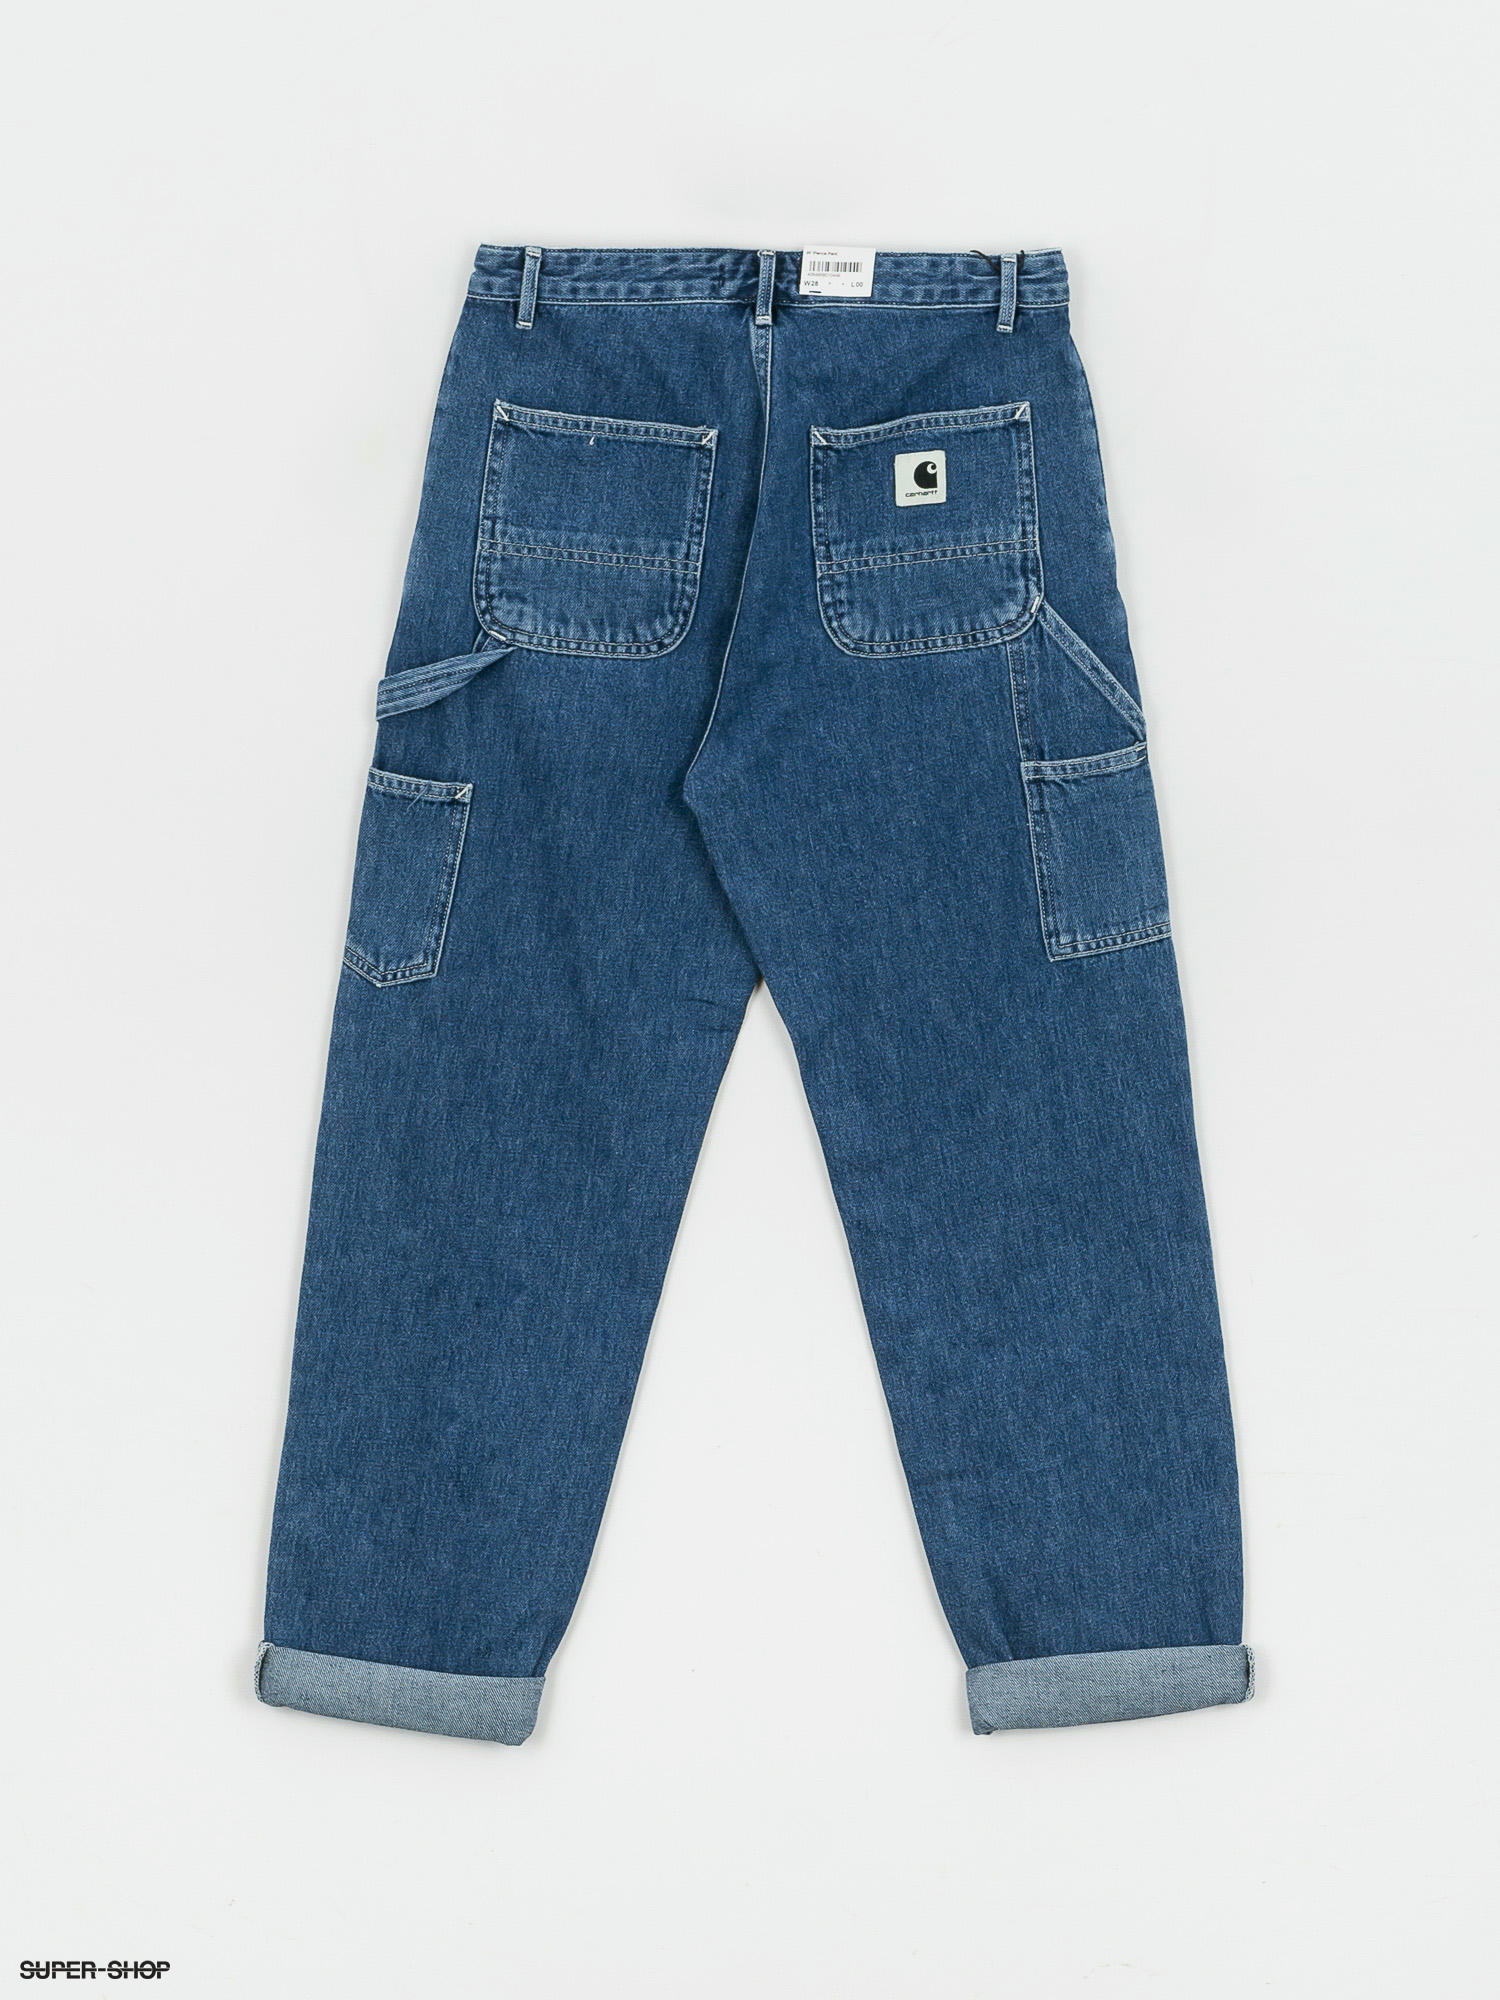 Pierce Pants by Carhartt Online, THE ICONIC